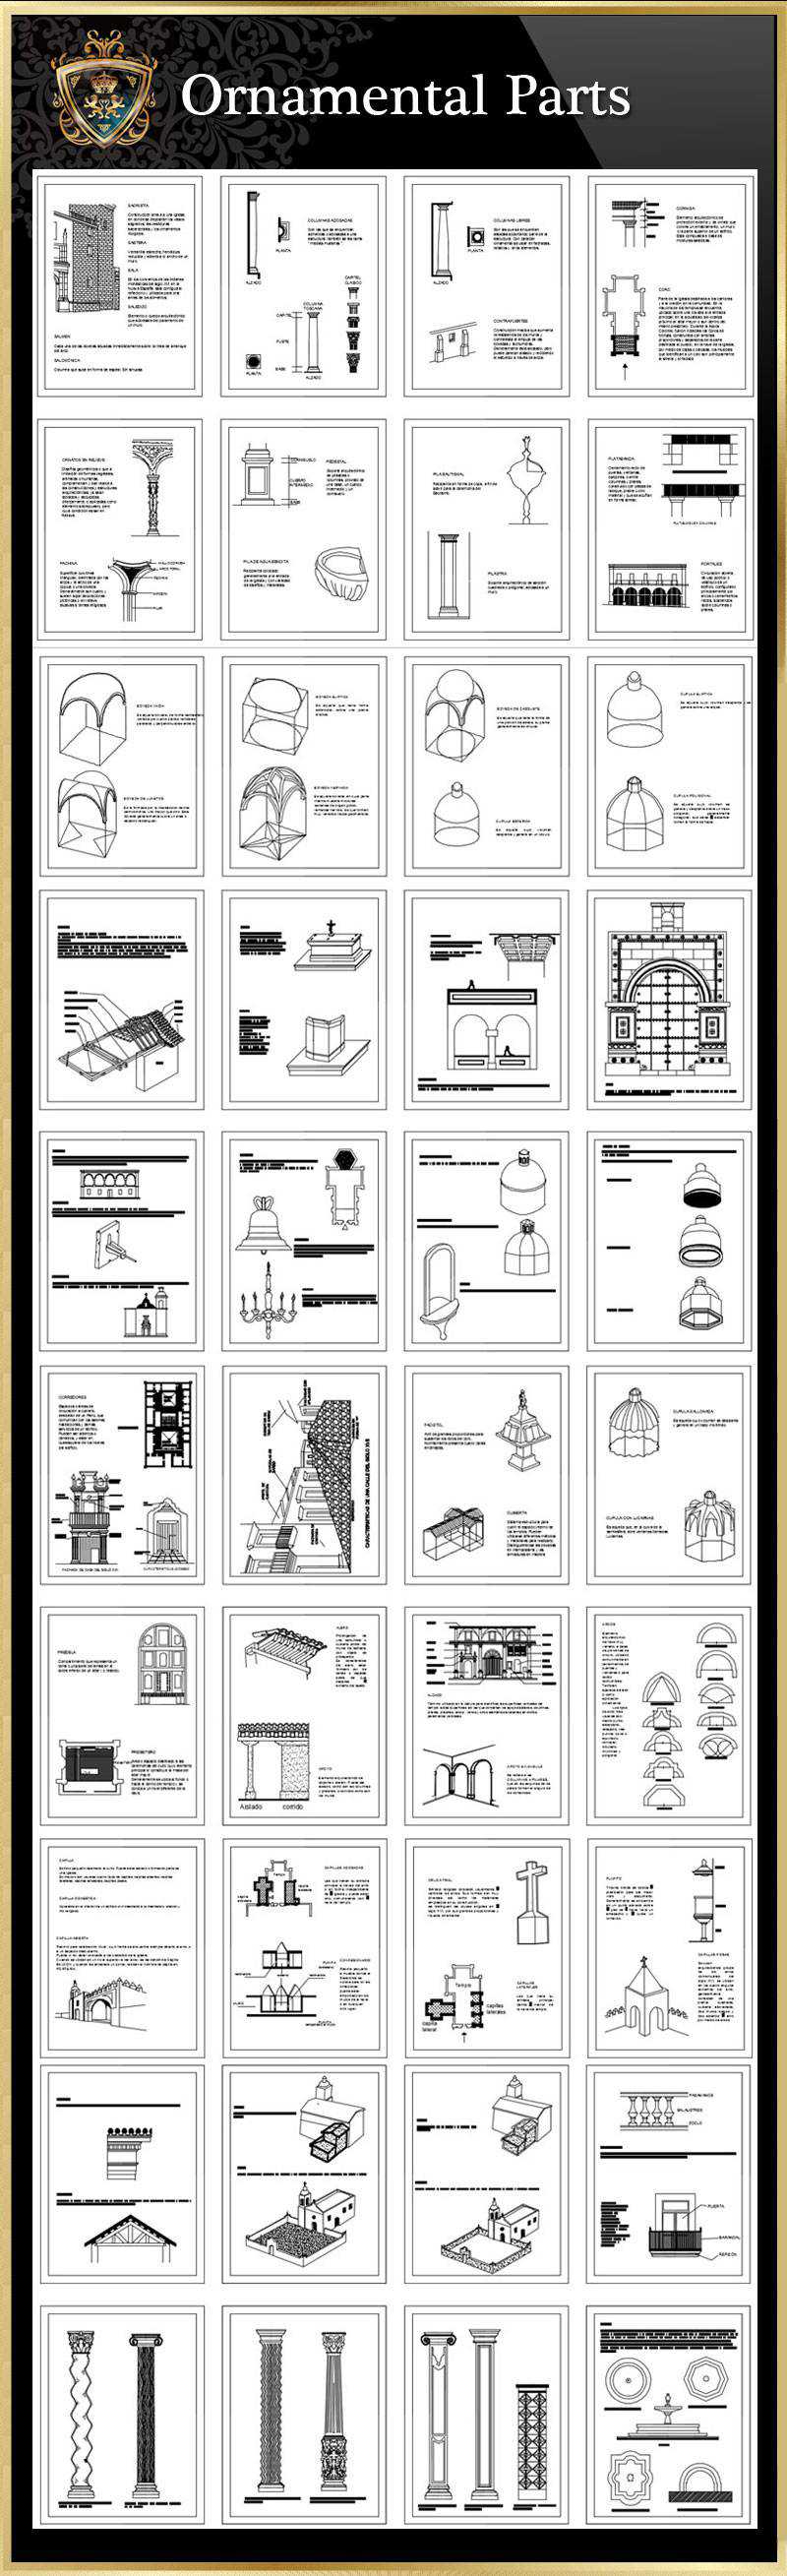 ★【Ornamental Parts of Buildings 1】Luxury home, Luxury Villas, Luxury Palace, Architecture Ornamental Parts, Decorative Inserts & Accessories, Handrail & Stairway Parts, Outdoor House Accessories, Euro Architectural Components, Arcade